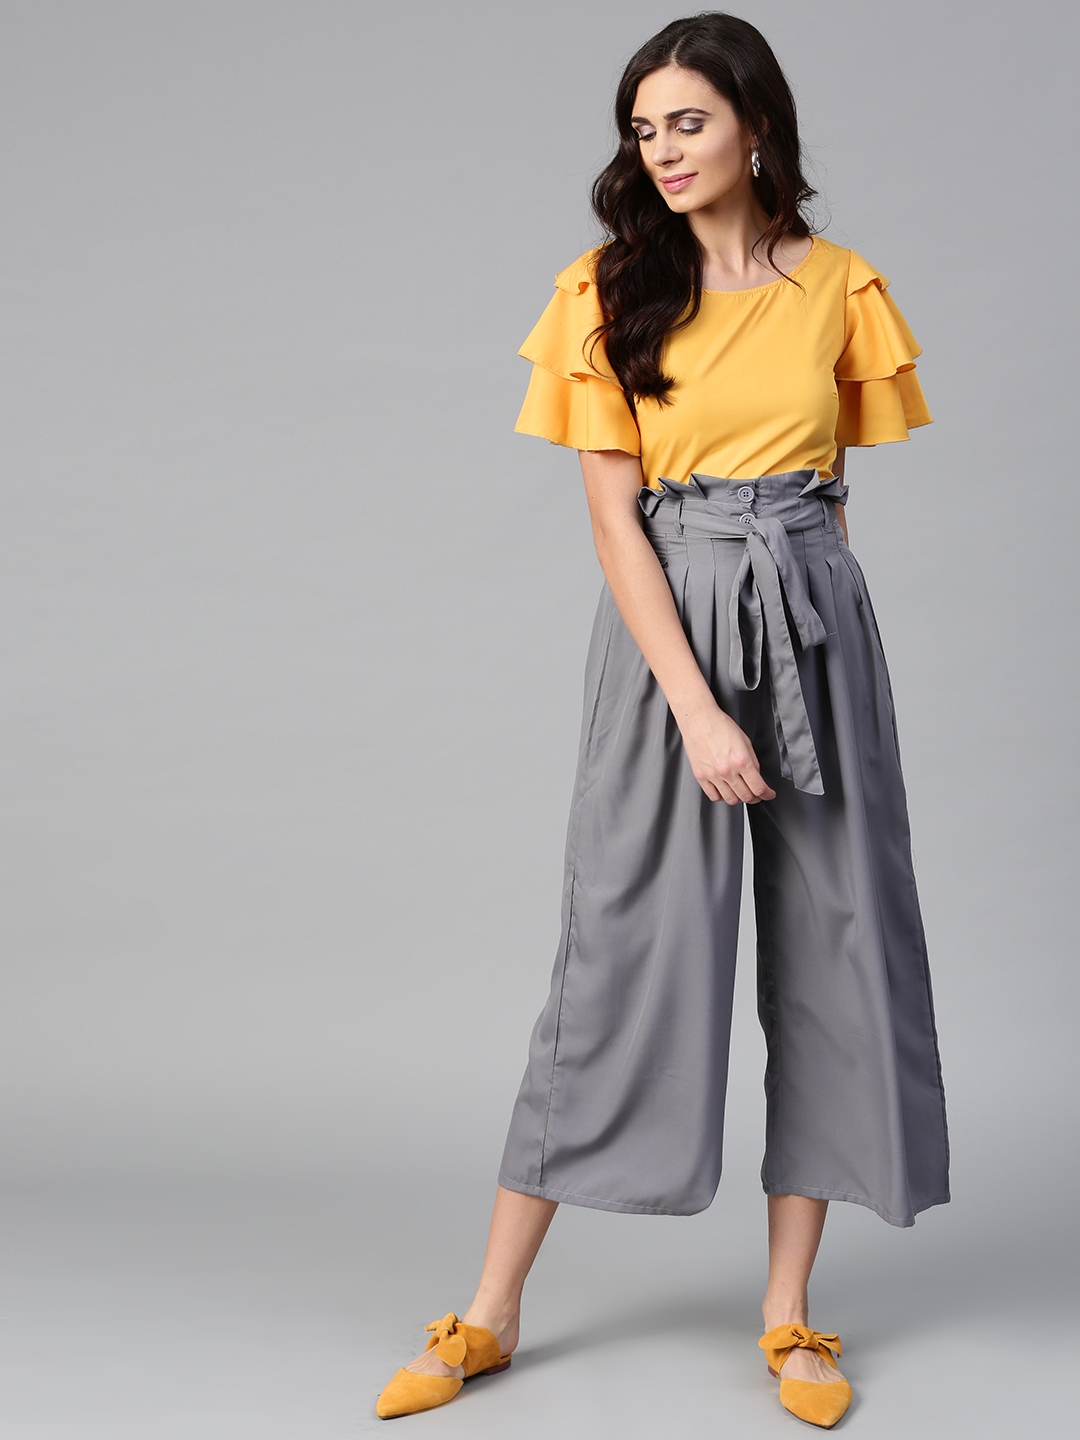 Berry Haute mustard yellow pants paired with a chiffon white top  Palazzo  pants Mustard pants outfit Yellow pants outfit